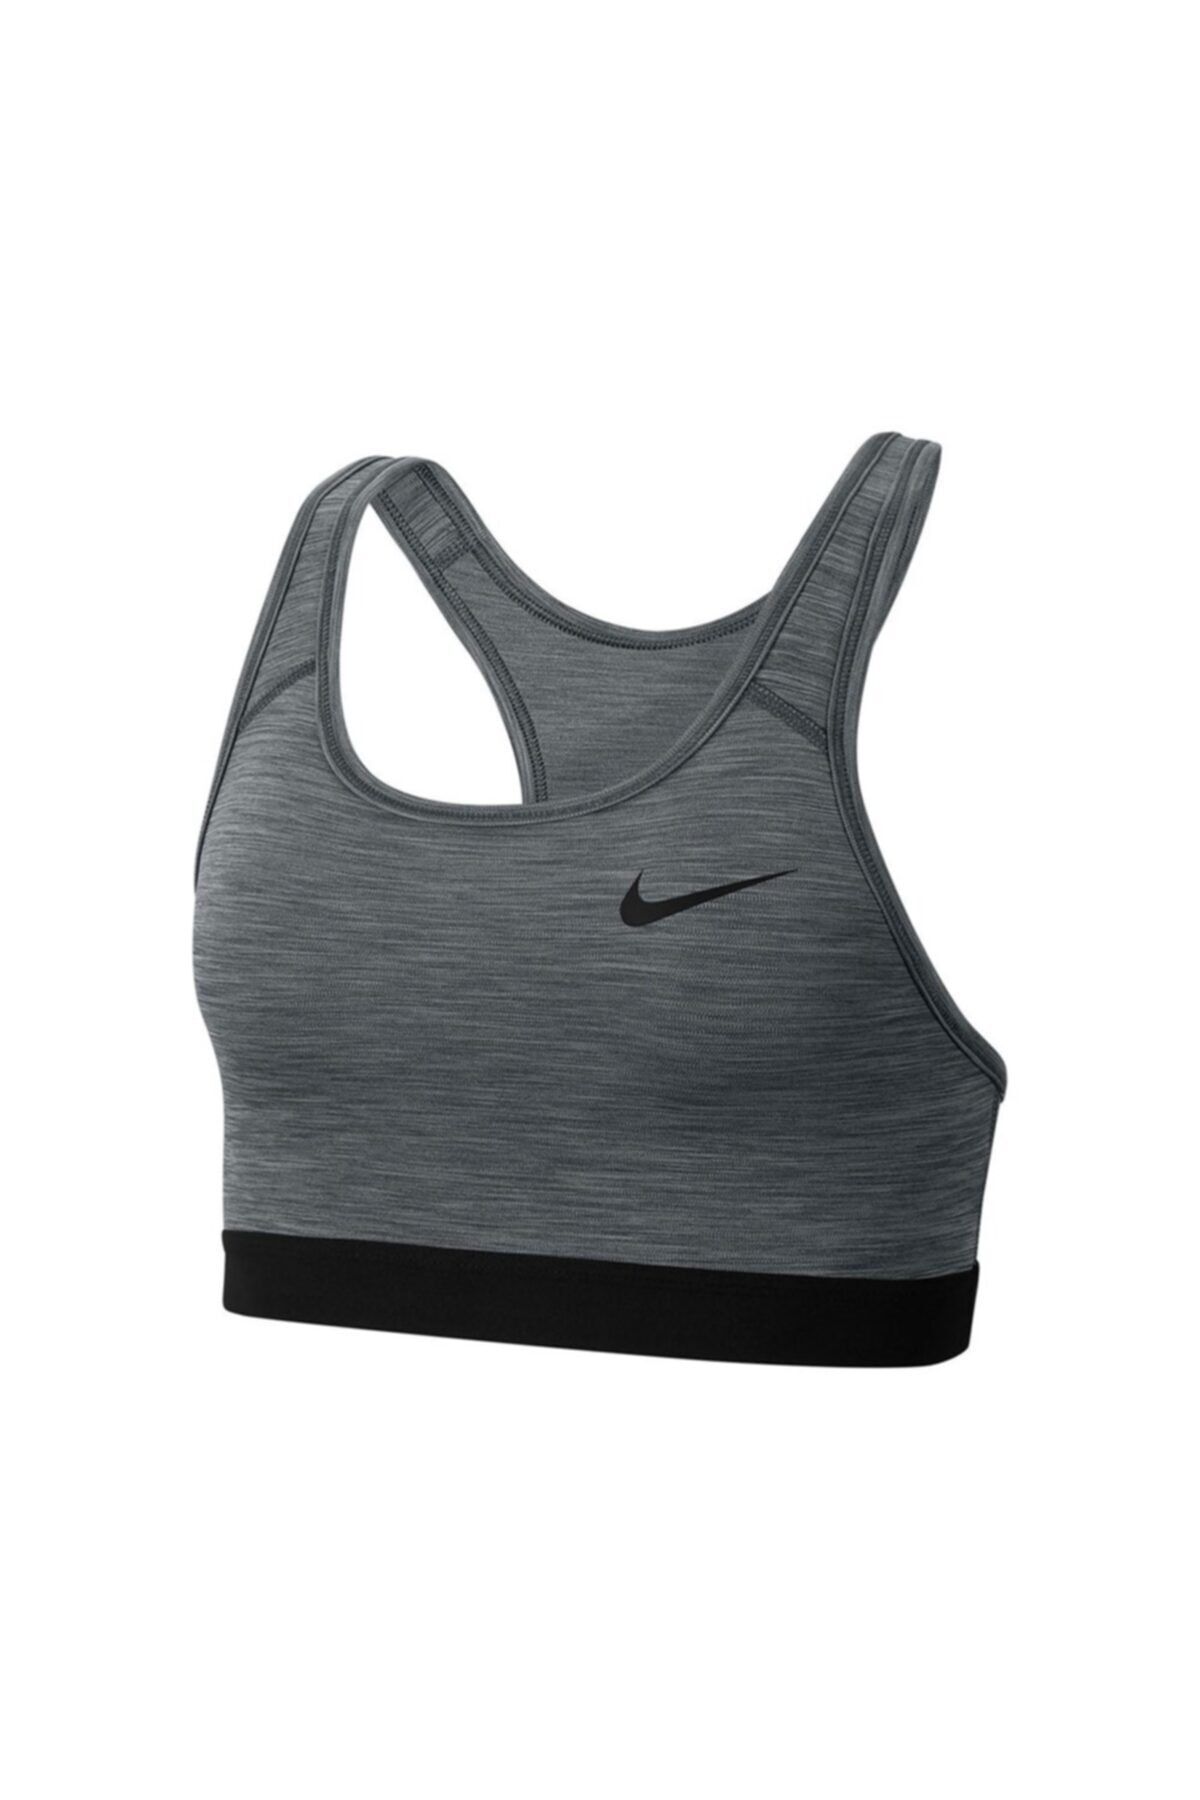 Nike DF SWSH BAND NONPDED BRA Grey / Black - Fast delivery